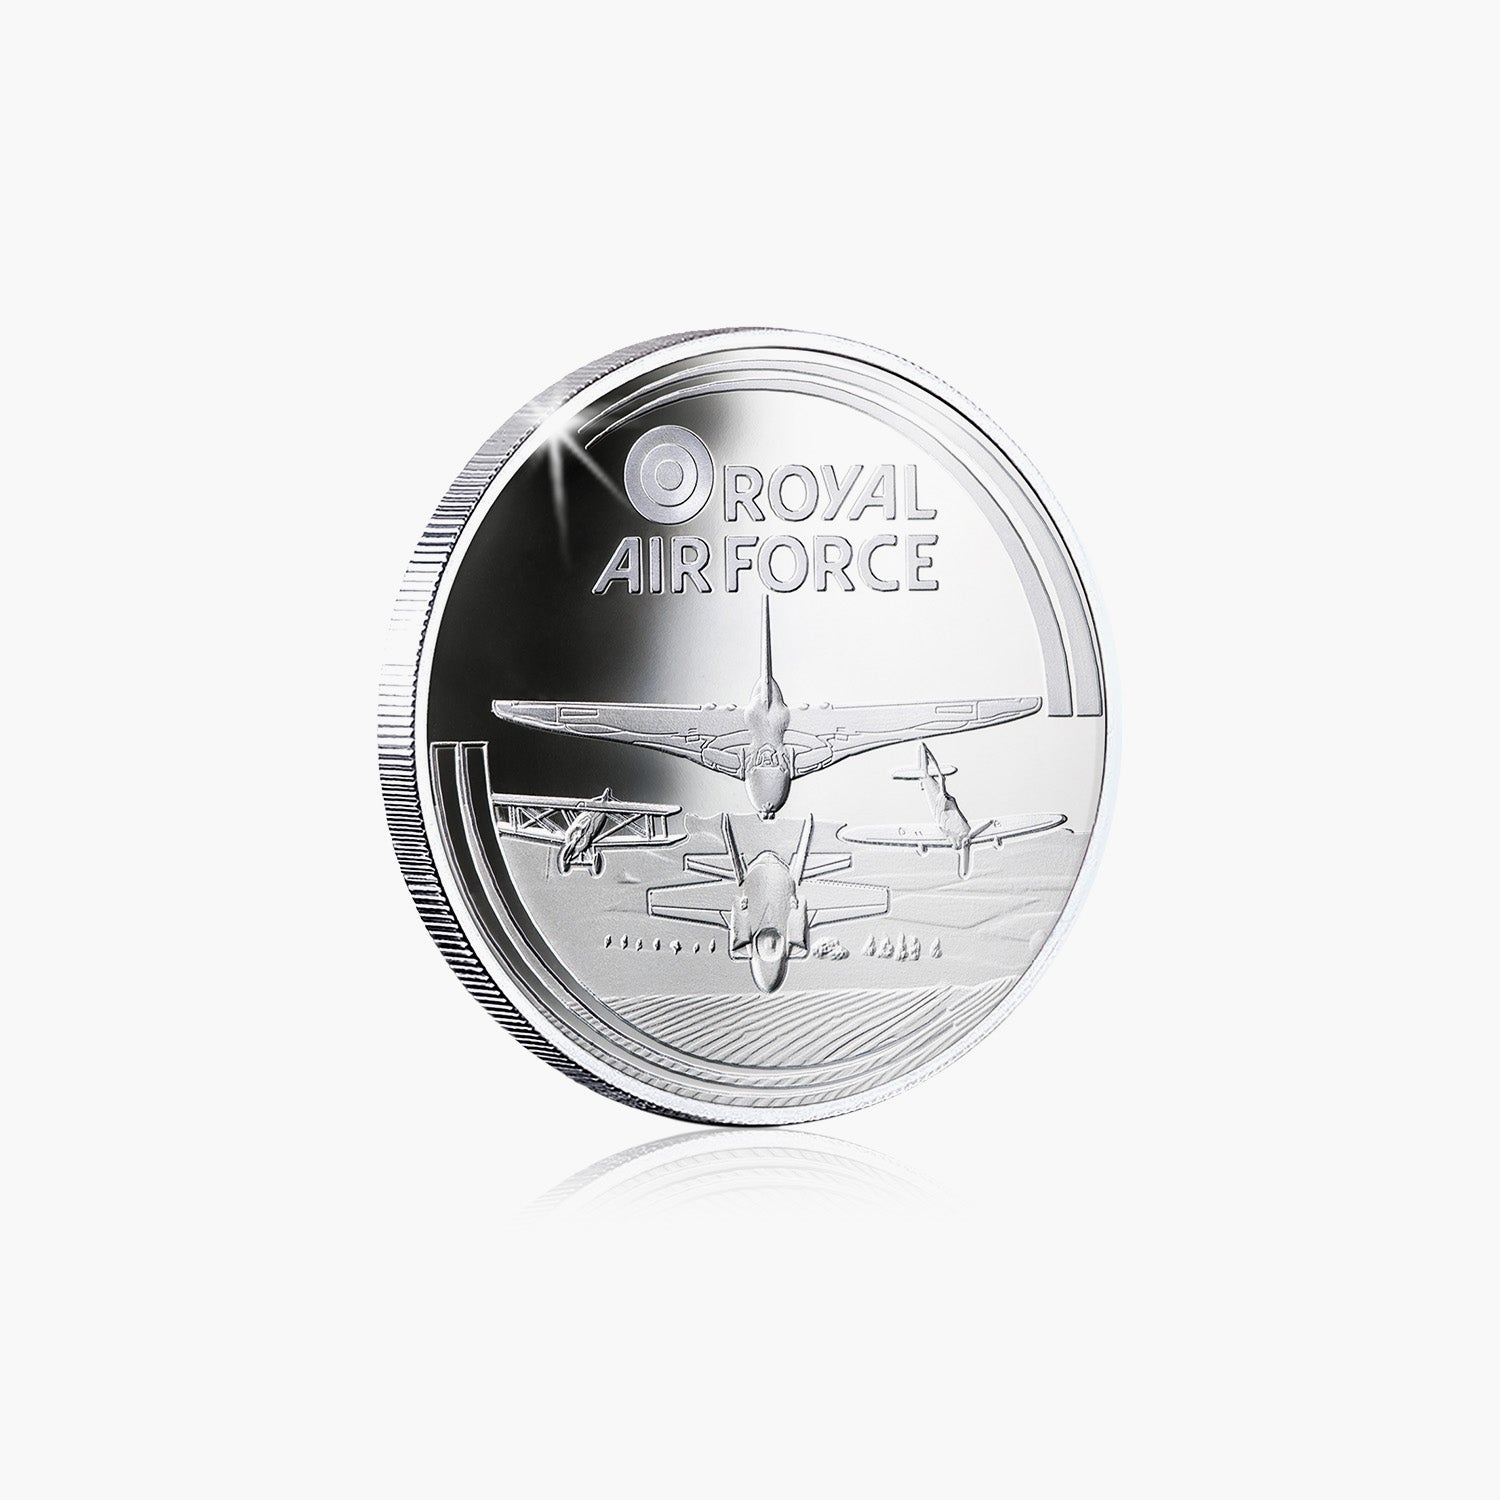 Camm's First Silver-Plated Commemorative